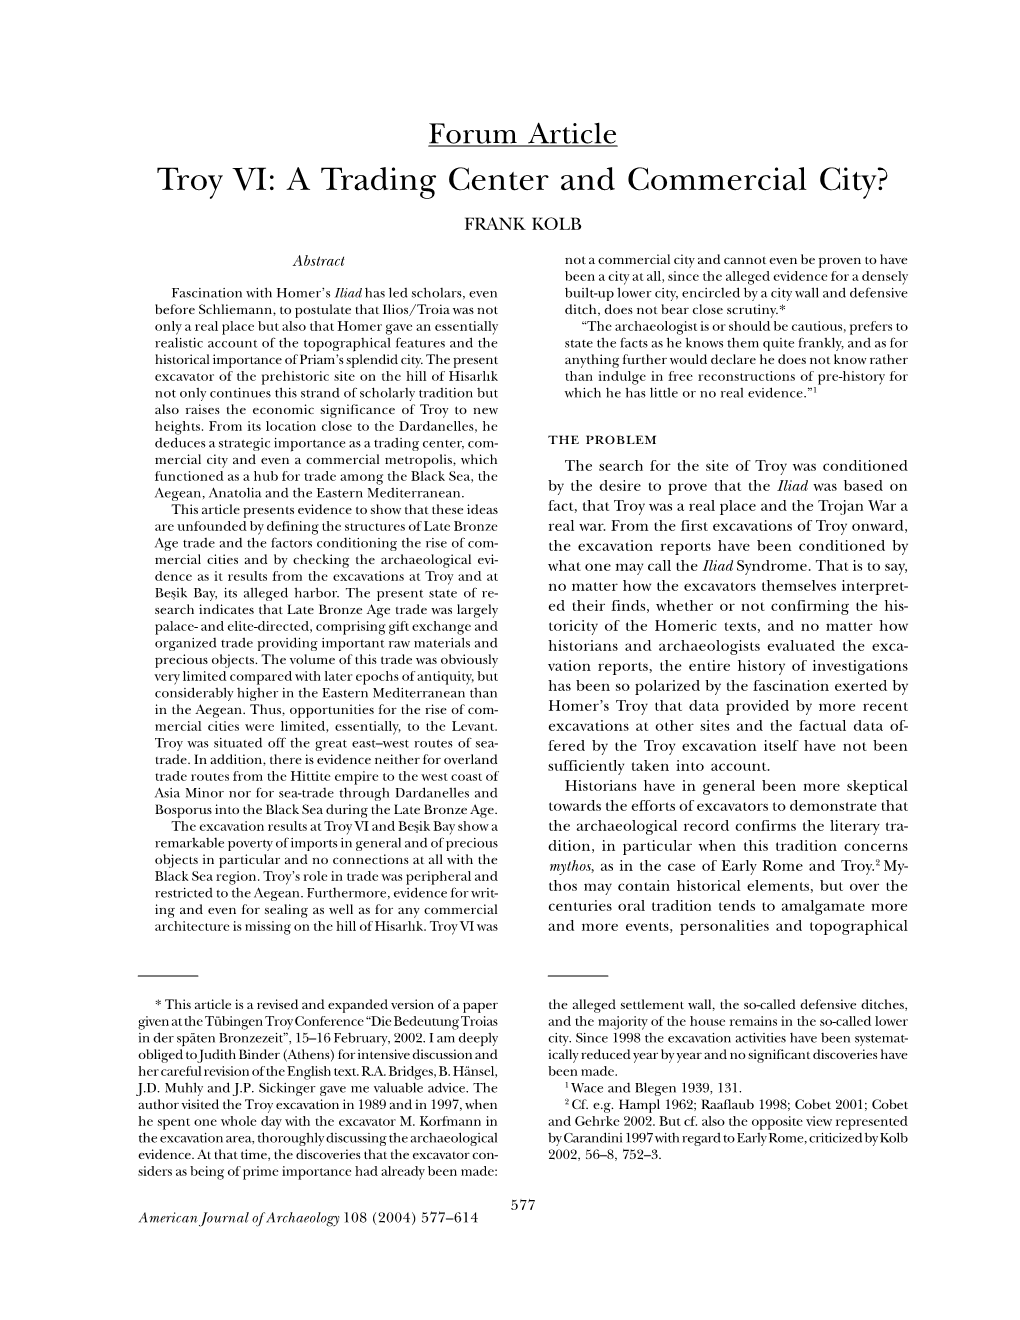 Troy VI: a Trading Center and Commercial City? FRANK KOLB